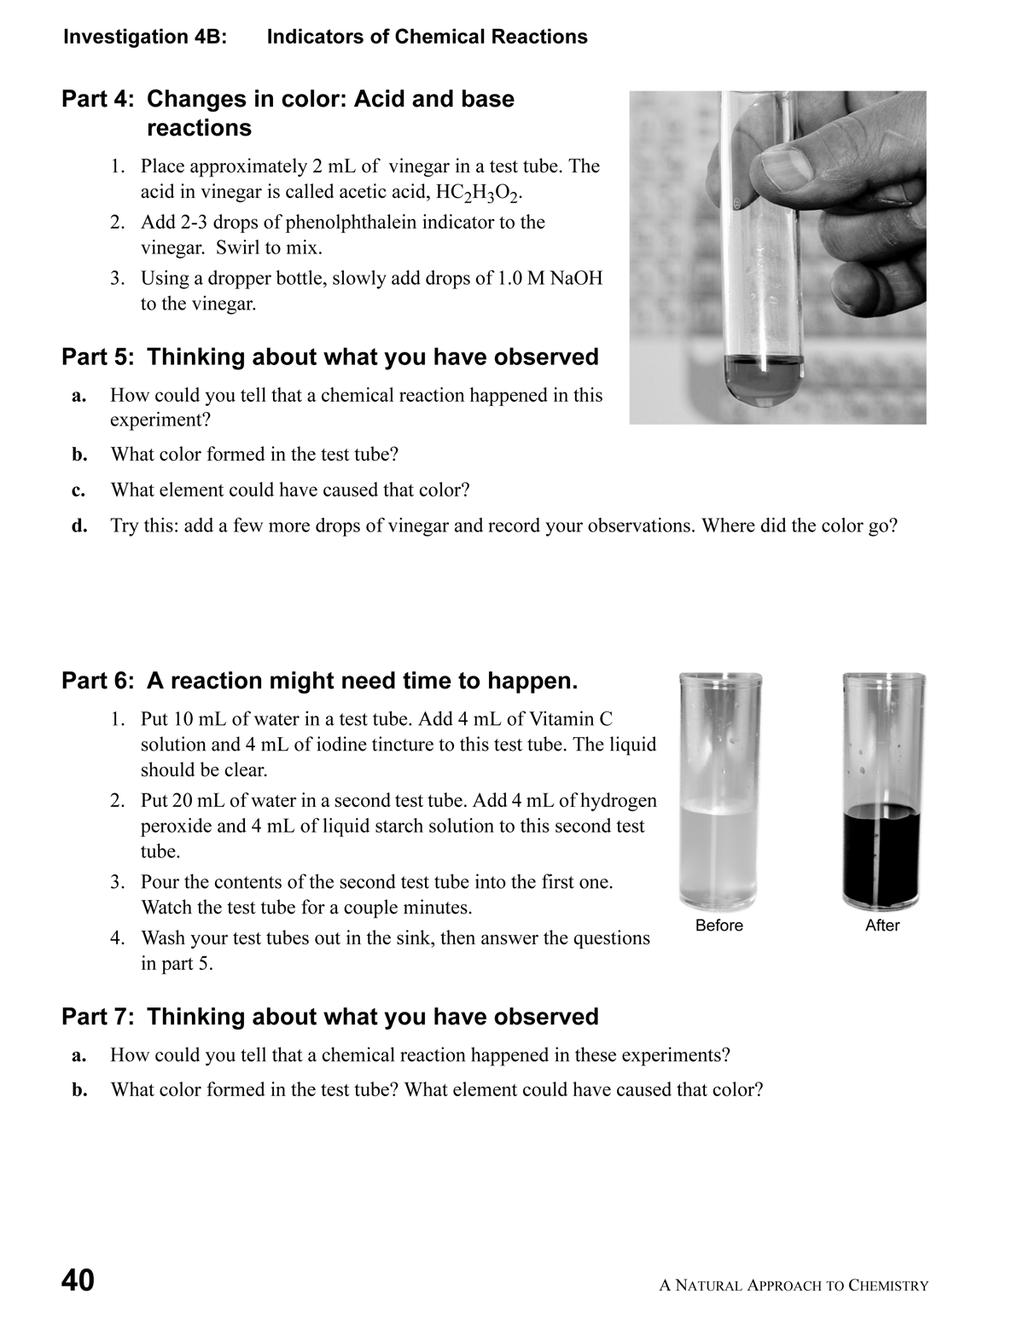 Investigation page Sample answers Example Answers 5a. The color of the solution changed from clear to pink. 5b. The test tube formed a dark pink color. 5c.